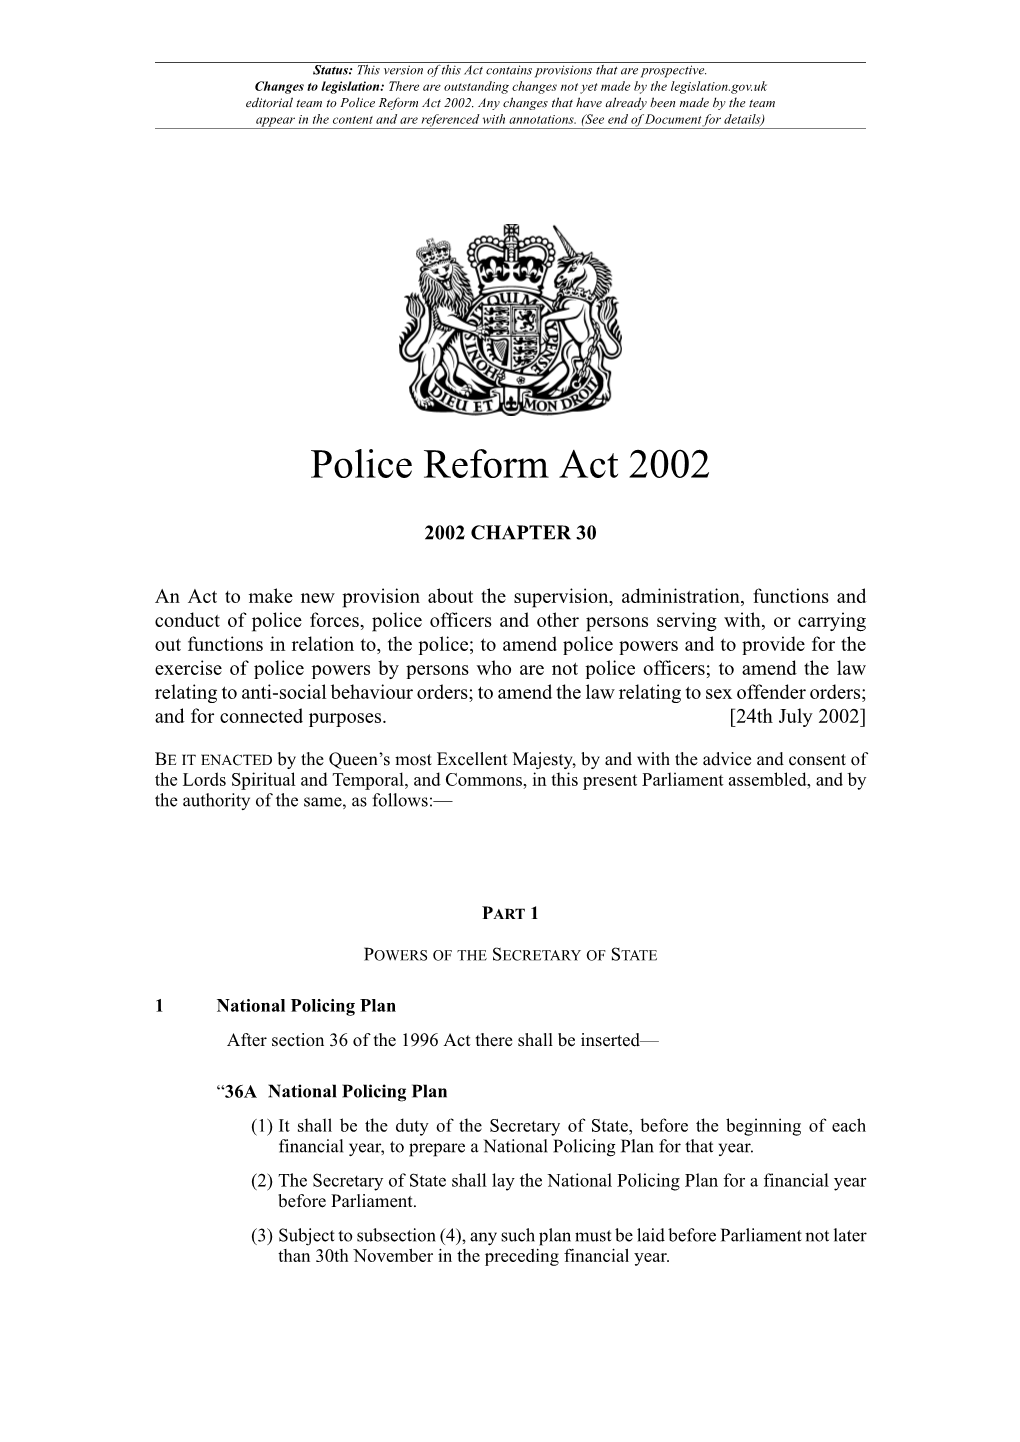 Police Reform Act 2002